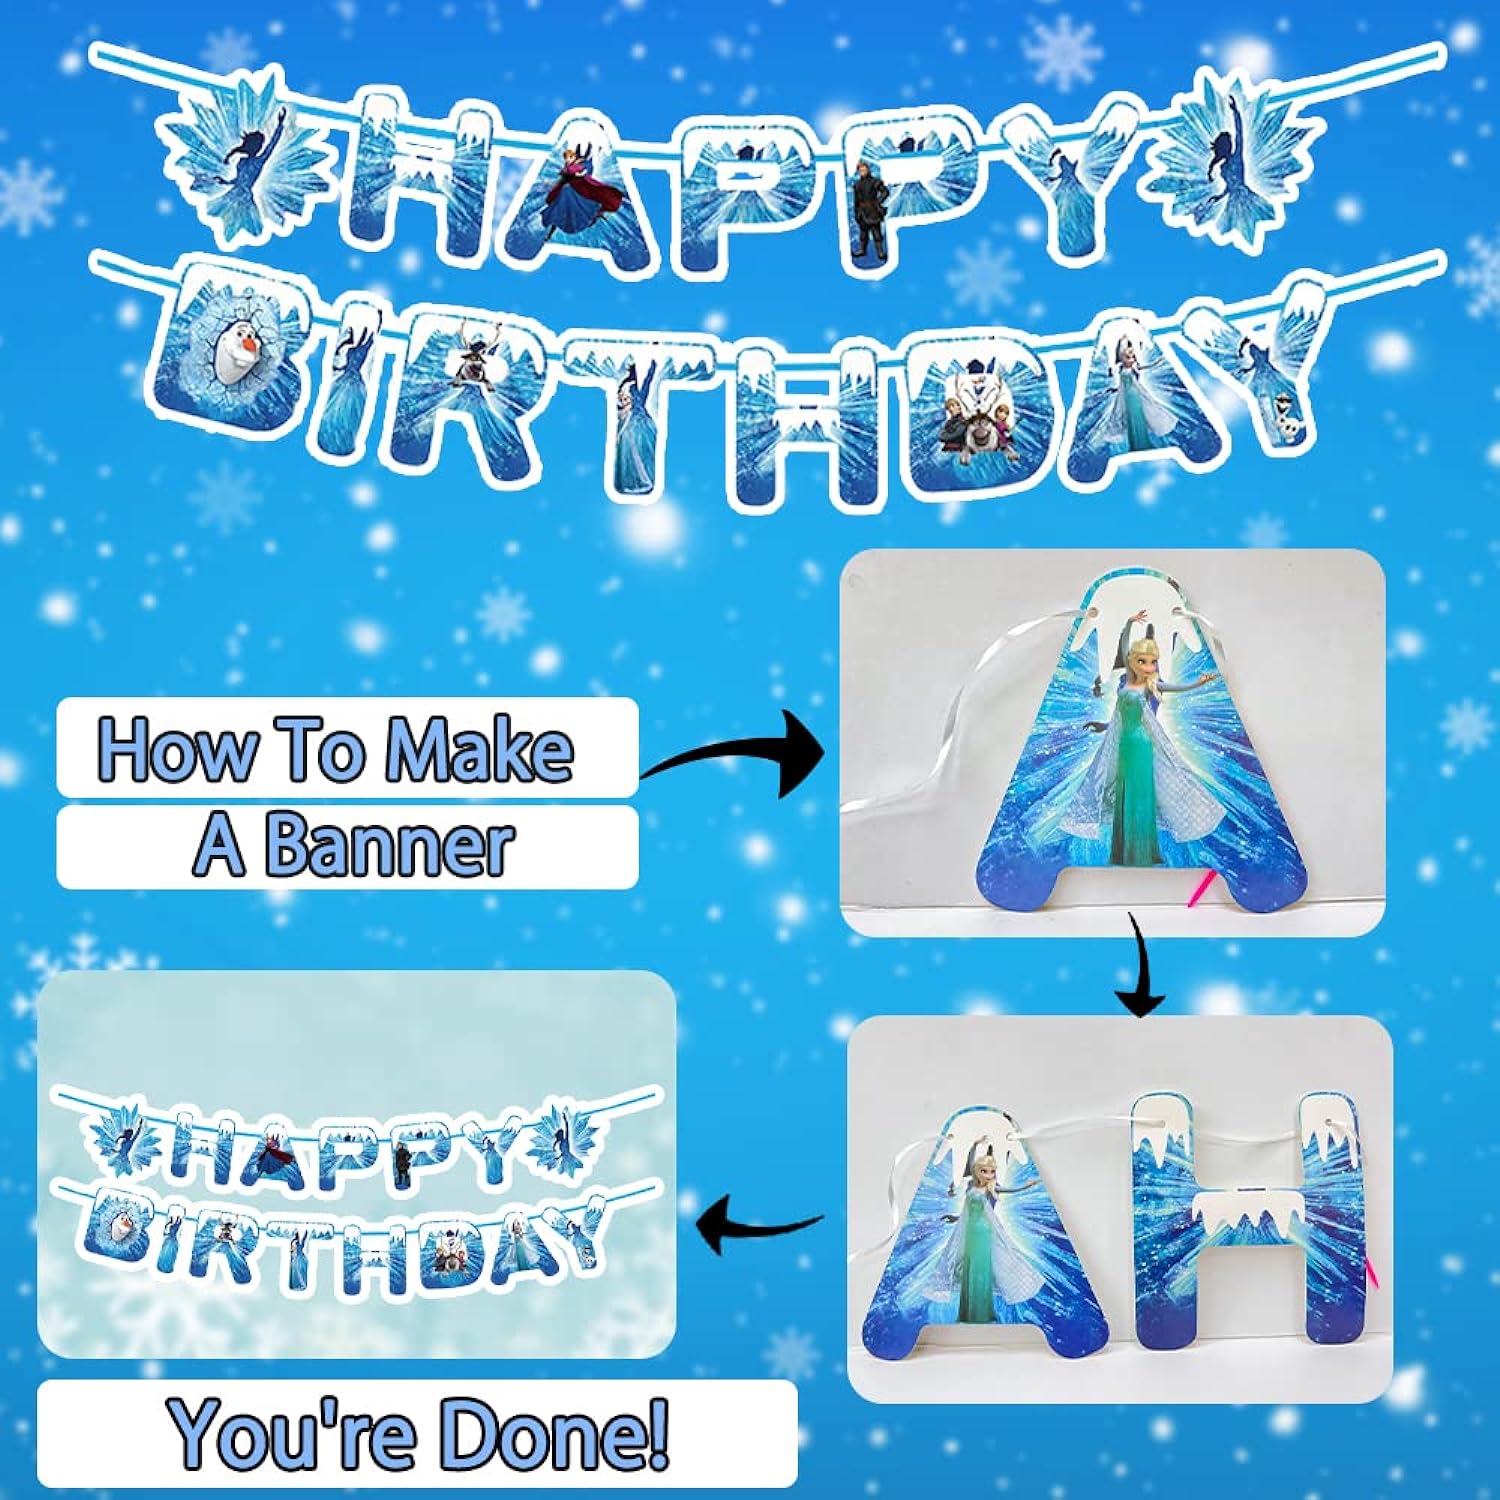 Great Choice Products Frozen Birthday Party Supplies,145Pcs Frozen Party Decorations&Tableware Set-Frozen Themed Birthday Banner Balloons&Frozen Pa…